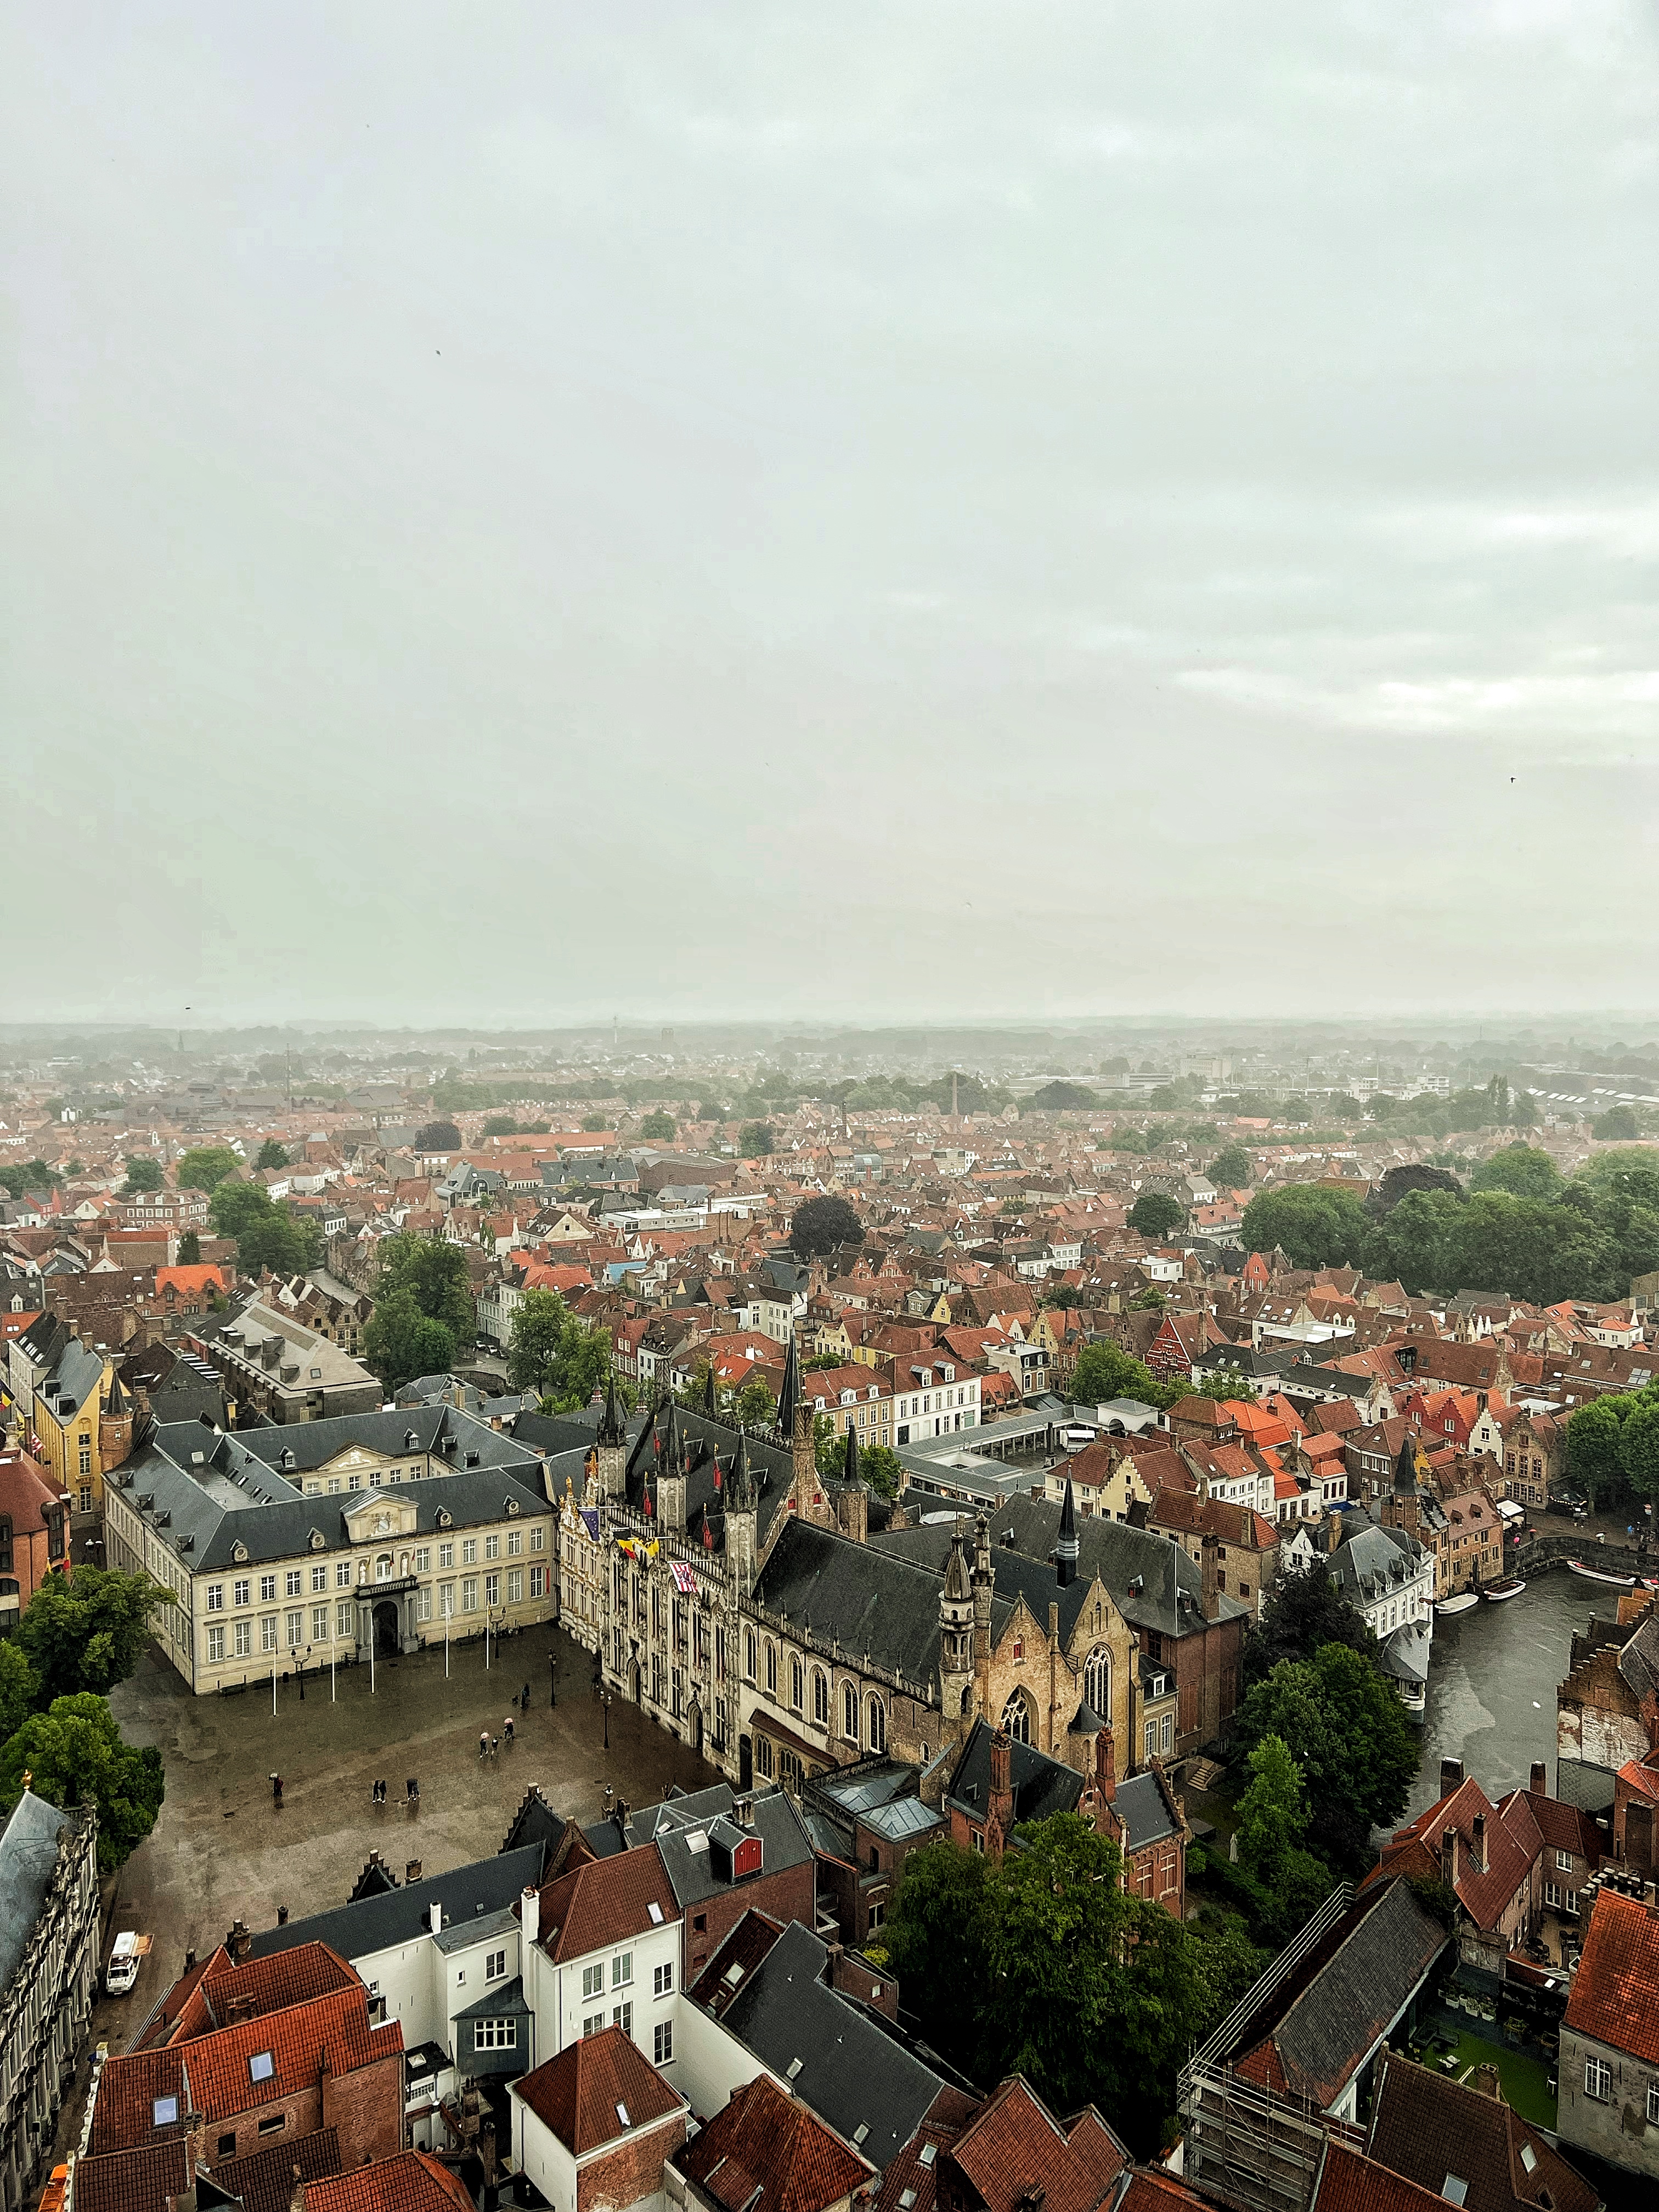 Adrienne Nguyen_Bruges Belgium_Travel Europe Solo_Traveling the World Alone_View from the Belfry Tower